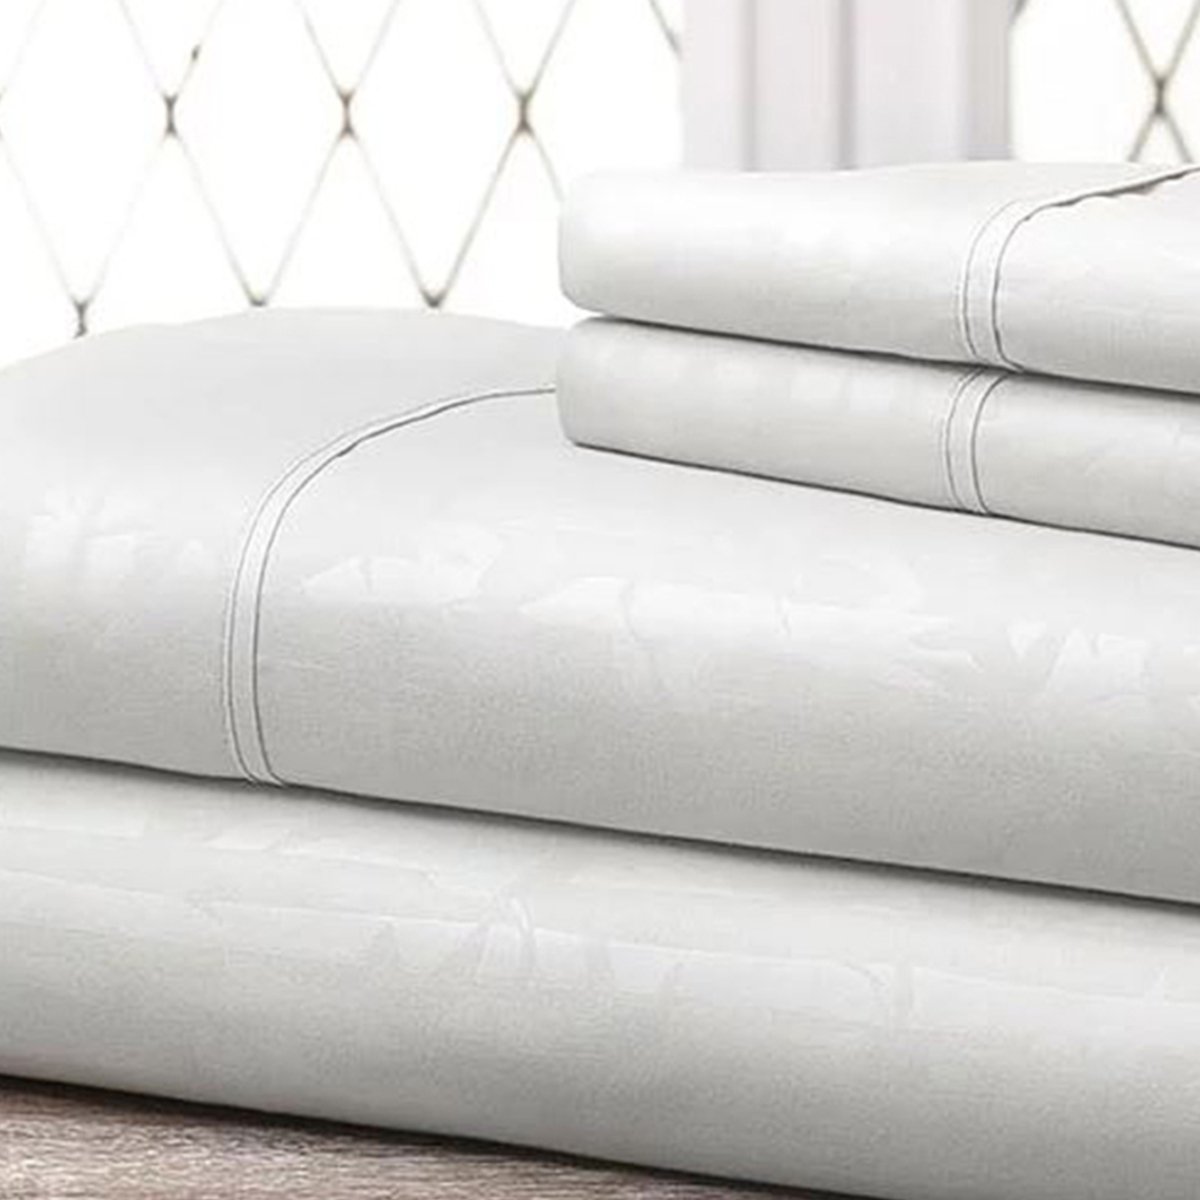 Hny-4pc-eb-whi-q Super-soft 1600 Series Bamboo Embossed Bed Sheet, White - Queen, 4 Piece